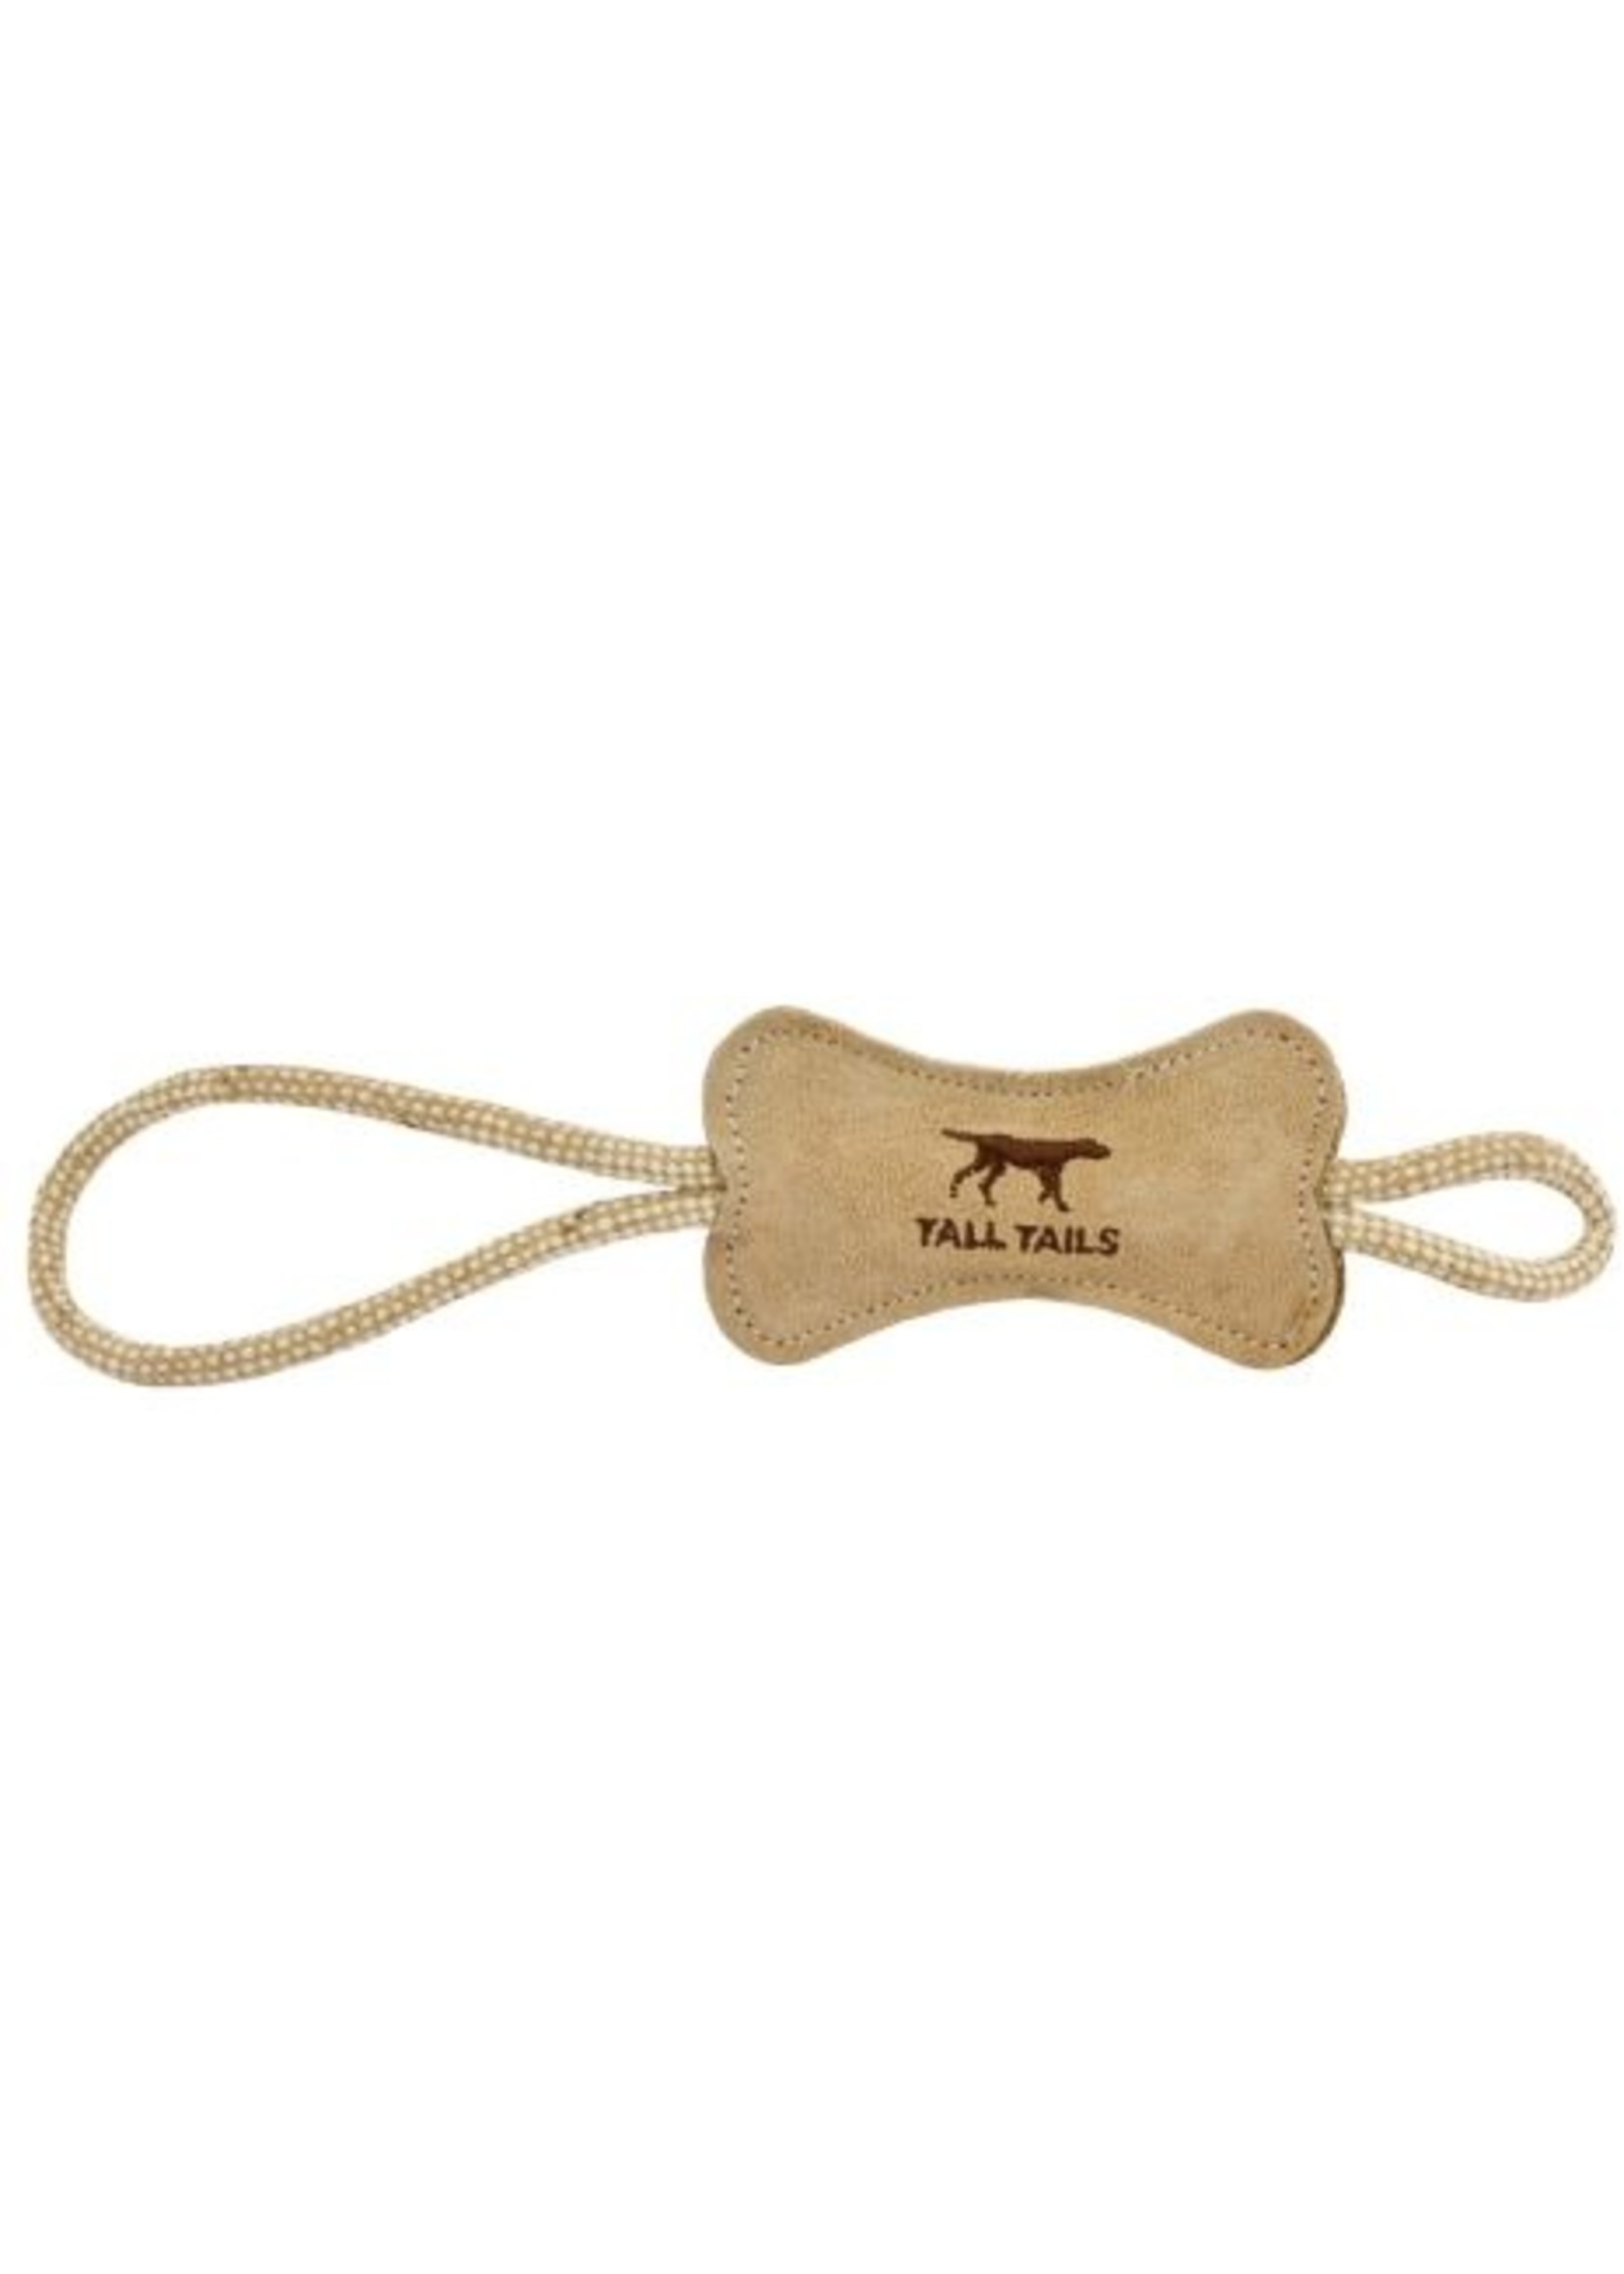 Tall Tails 12in Natural Leather Bone Tug Dog Toy